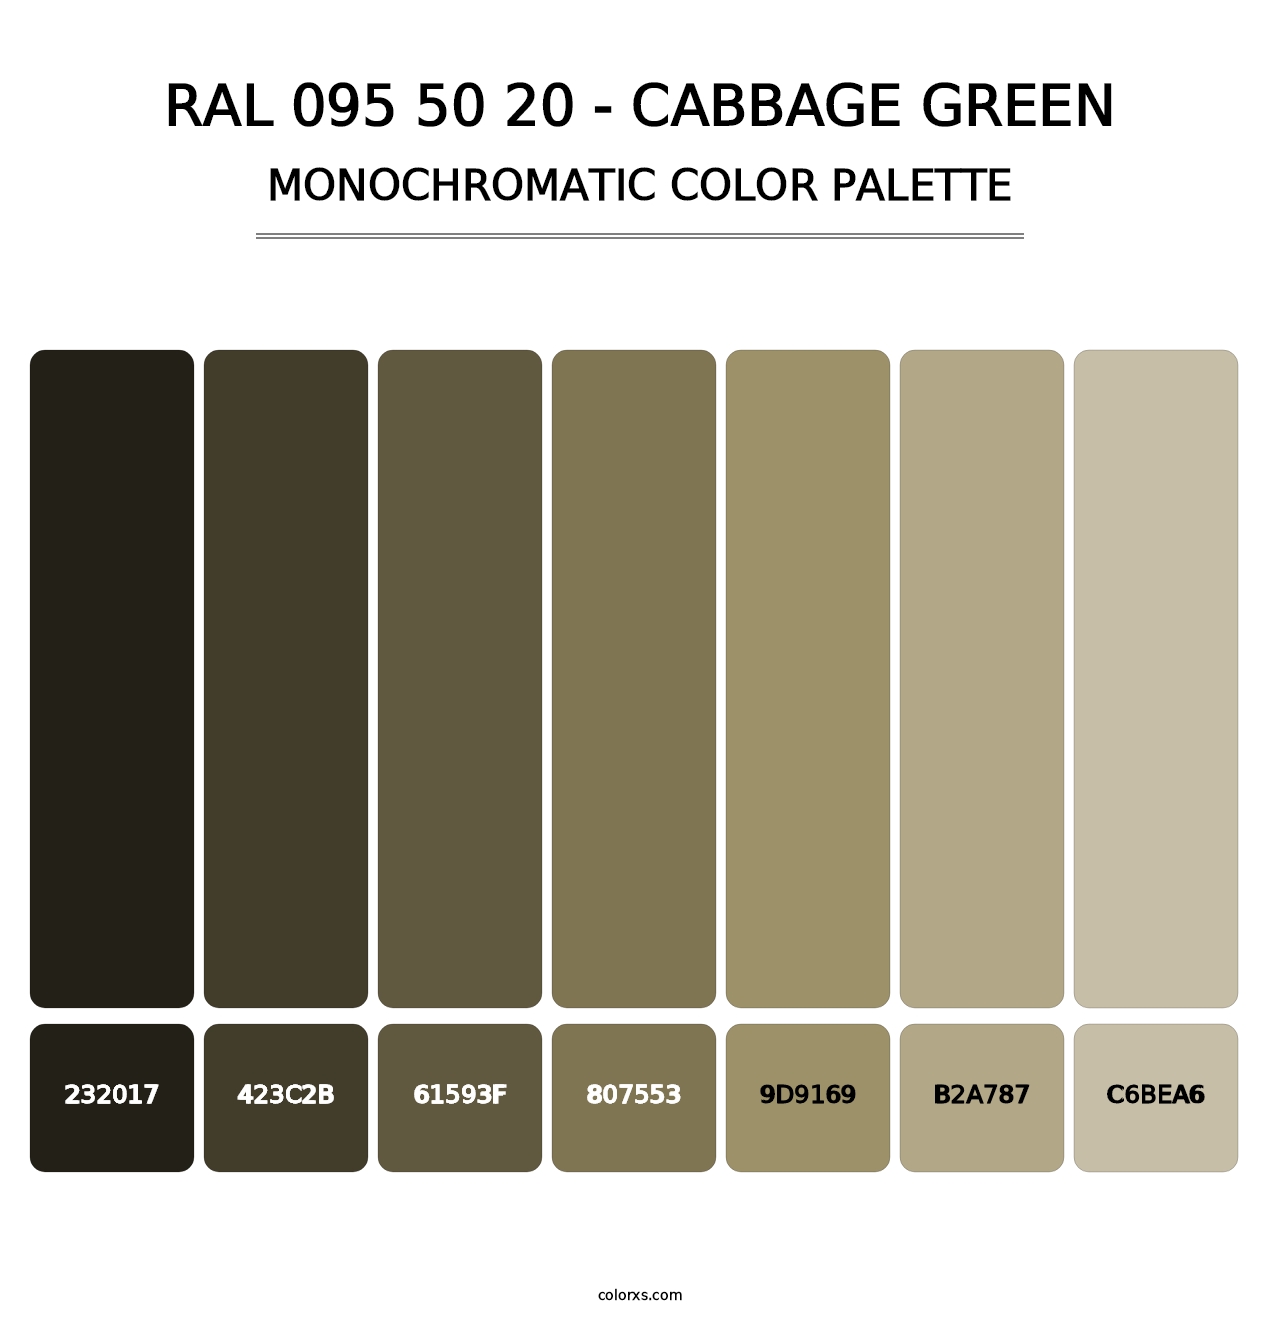 RAL 095 50 20 - Cabbage Green - Monochromatic Color Palette